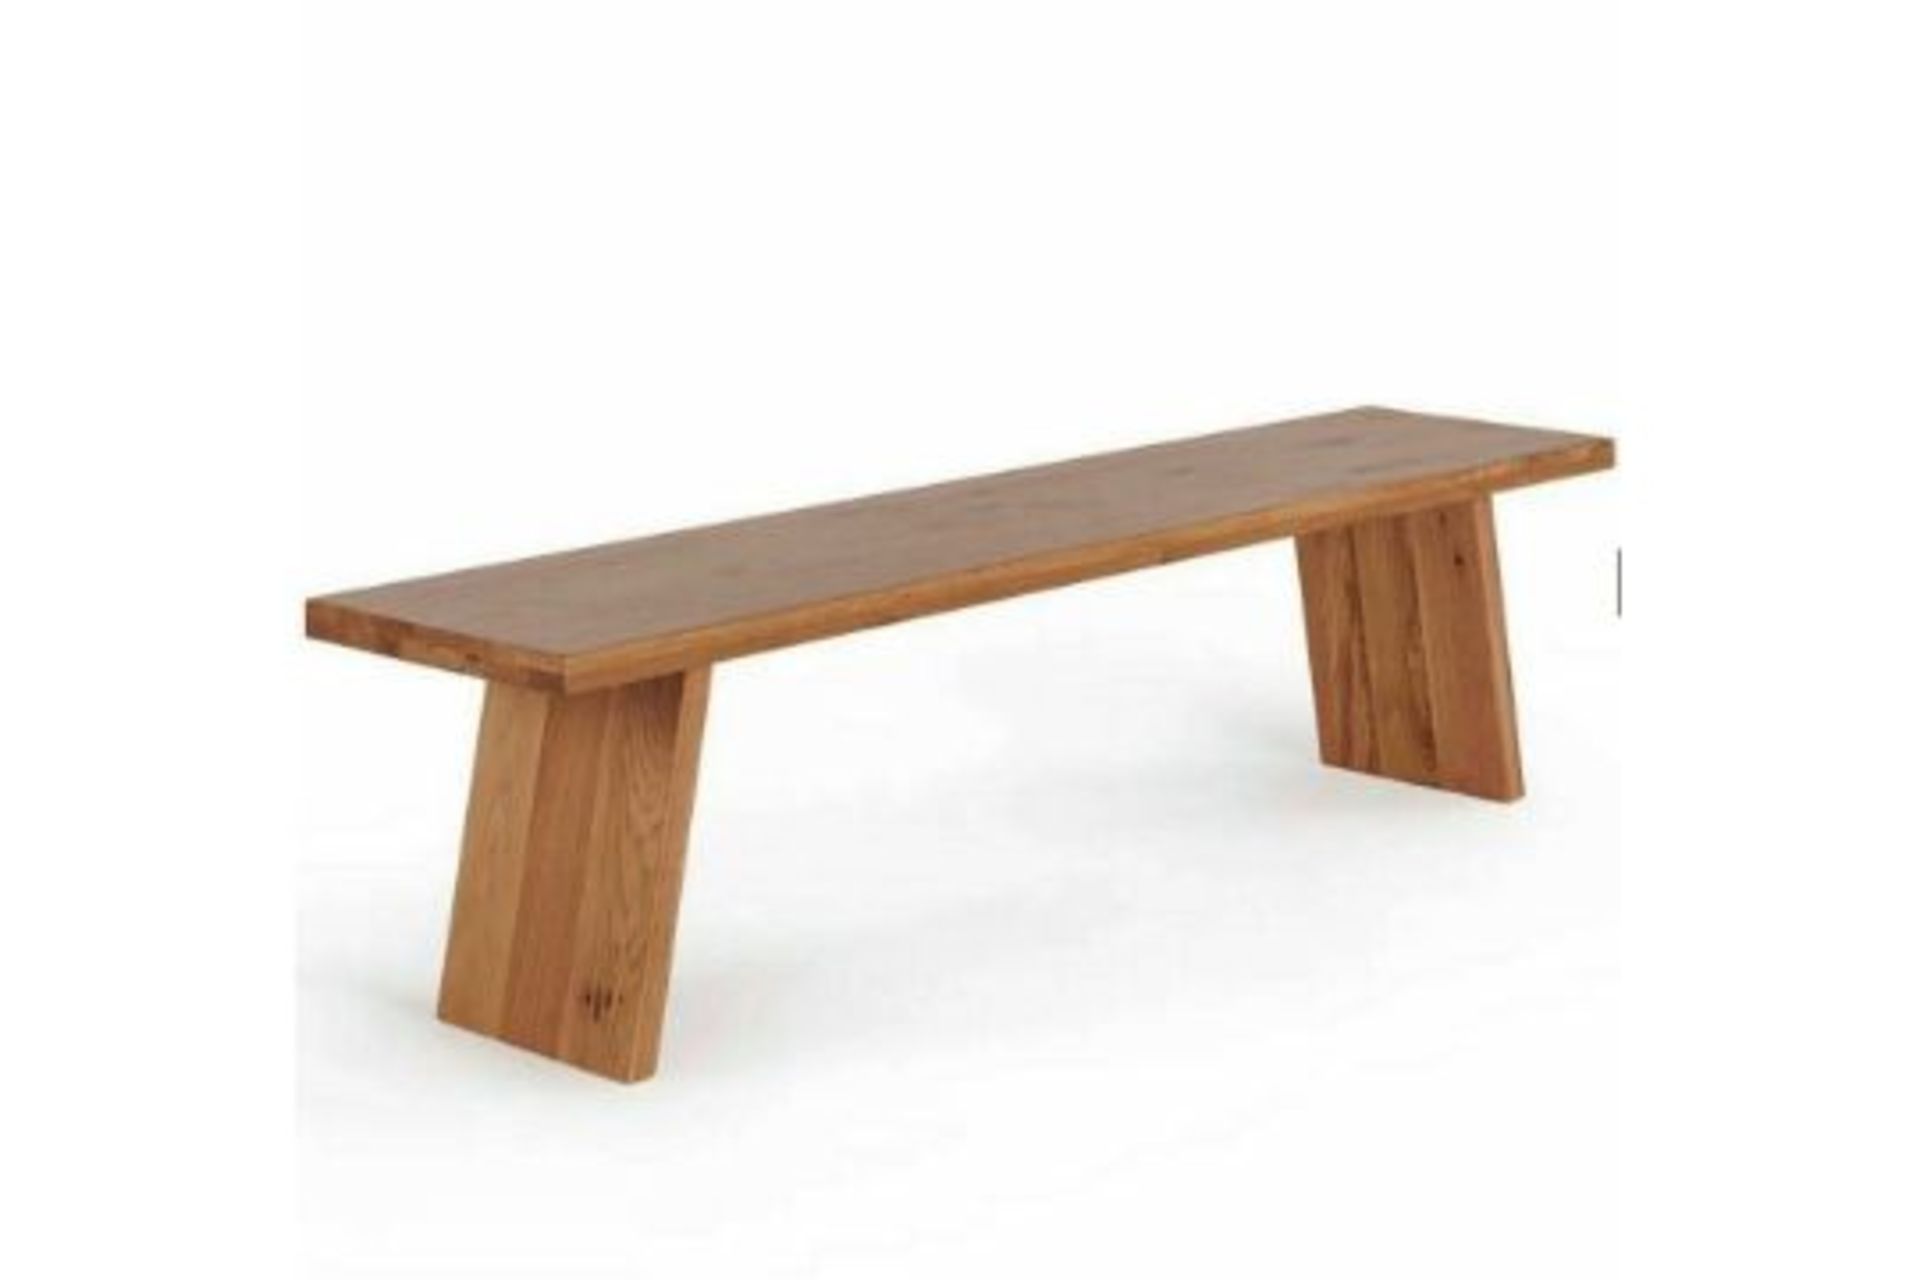 4 X New Boxed - Cantilever Solid Oak Bench. 180cm Long. RRP £330 EACH, TOTAL LOT RRP £1,320. For a